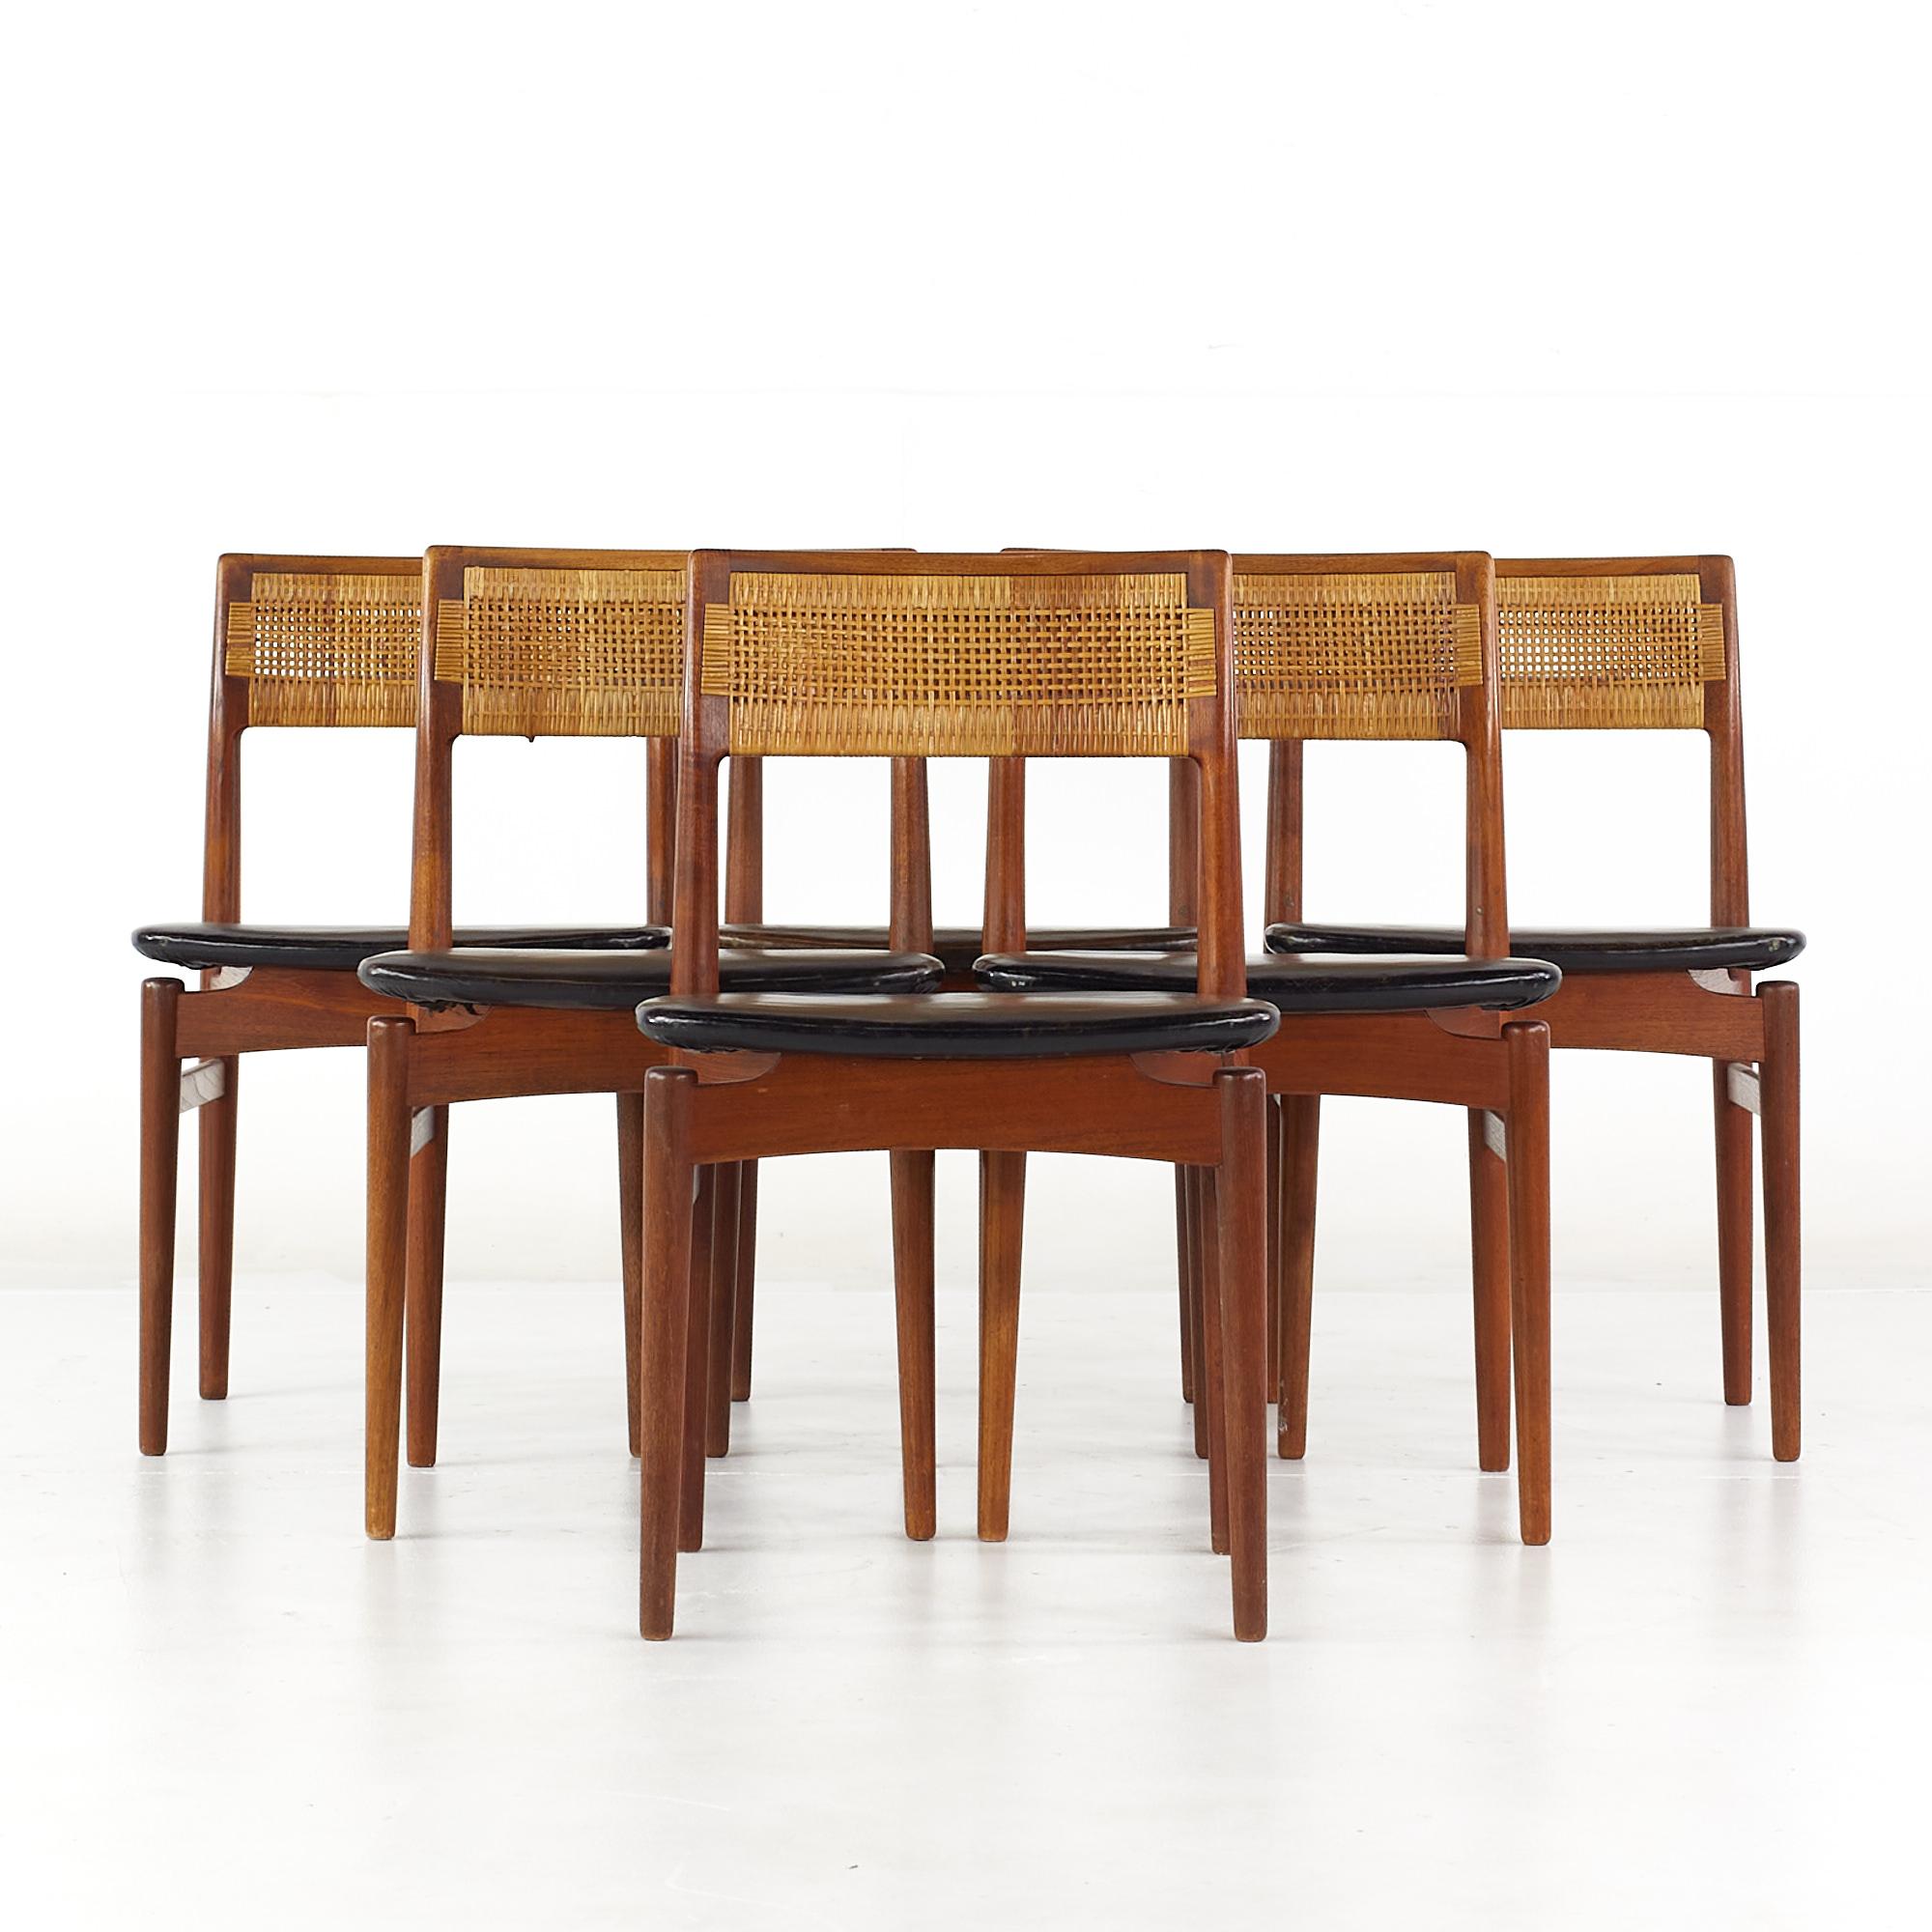 Erik Wørts Mid Century Danish Teak and Cane Dining Chairs - Set of 6

Each chair measures: 18 wide x 16.5 deep x 30.25 inches high, with a seat height/chair clearance of 17.5 inches

All pieces of furniture can be had in what we call restored